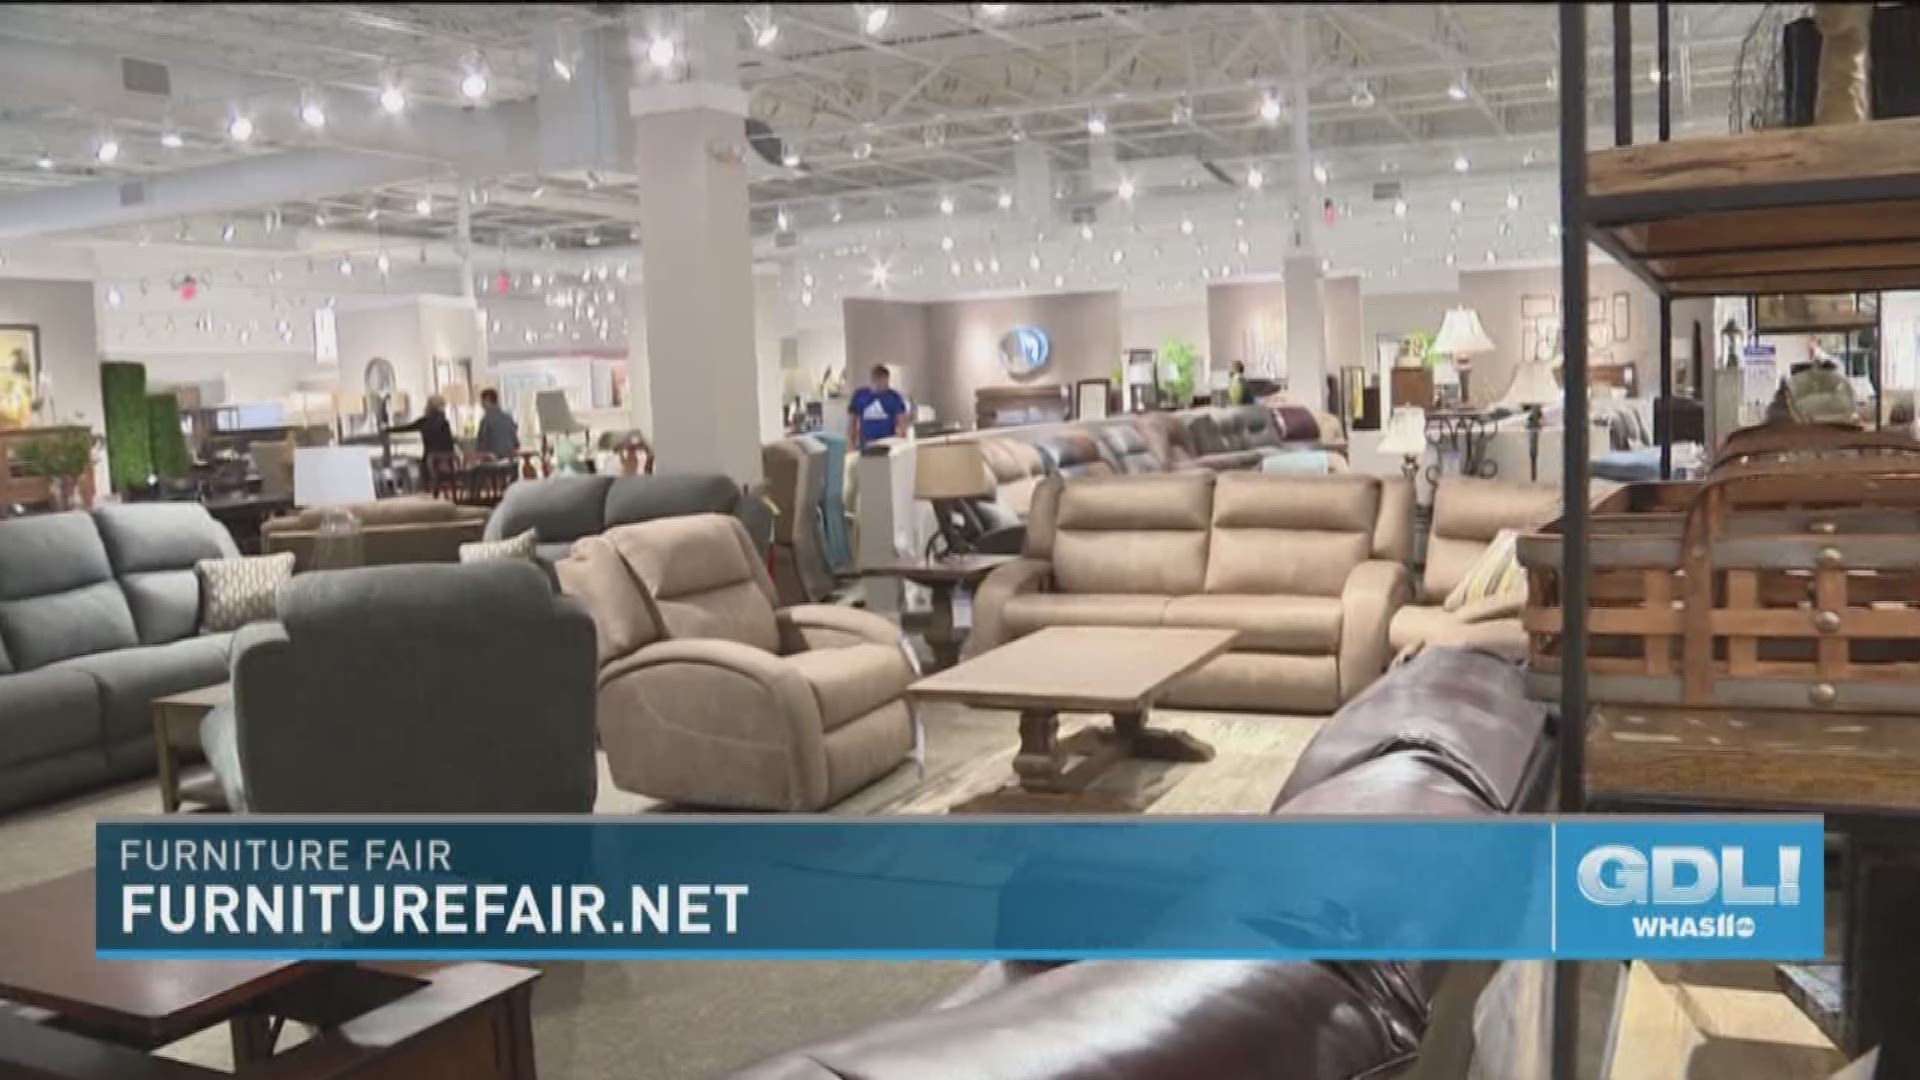 Furniture Fair has opened its first Louisville store at 9132 Taylorsville Road.